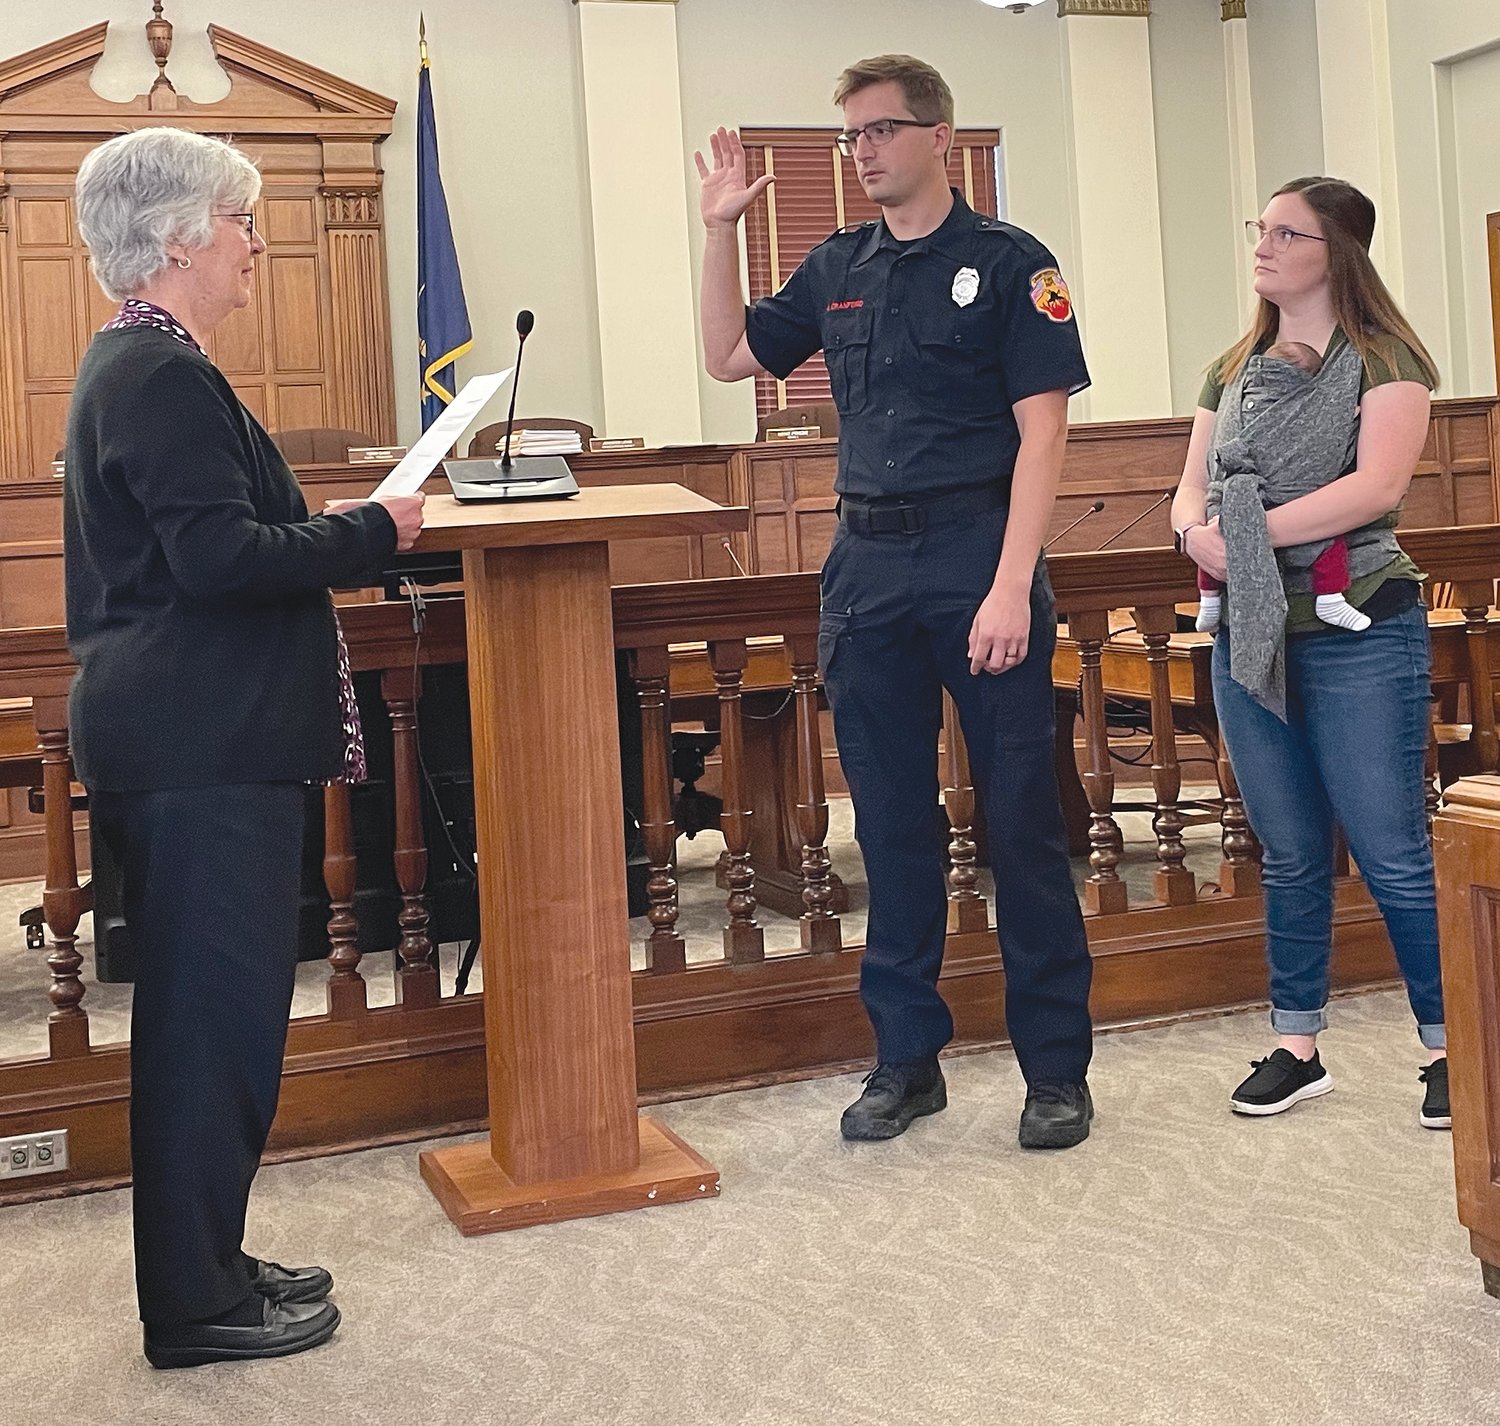 Crawfordsville City Clerk-Treasurer Terri Gadd, left, administers the oath of office Wednesday to the city's newest firefighter, Jacob Cranford. He was joined by his wife and child. He was joined by his wife and child in the city council chambers for the ceremony.